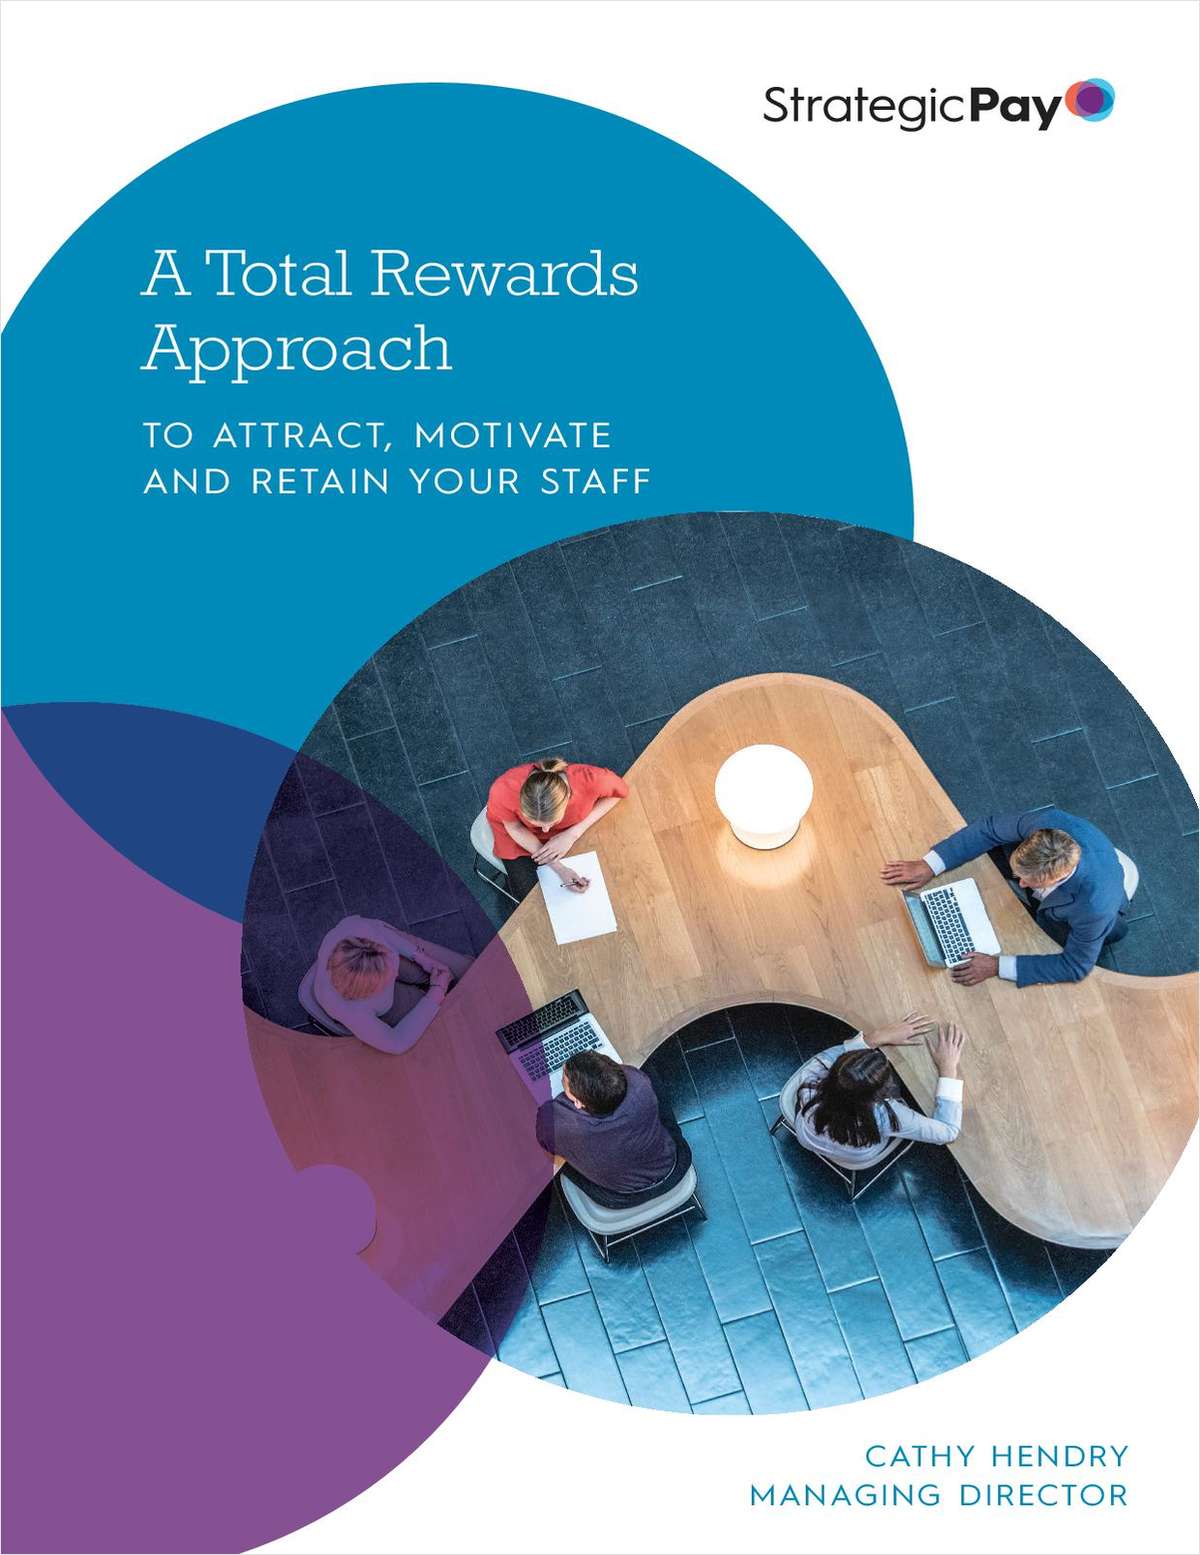 Taking a total rewards approach to talent